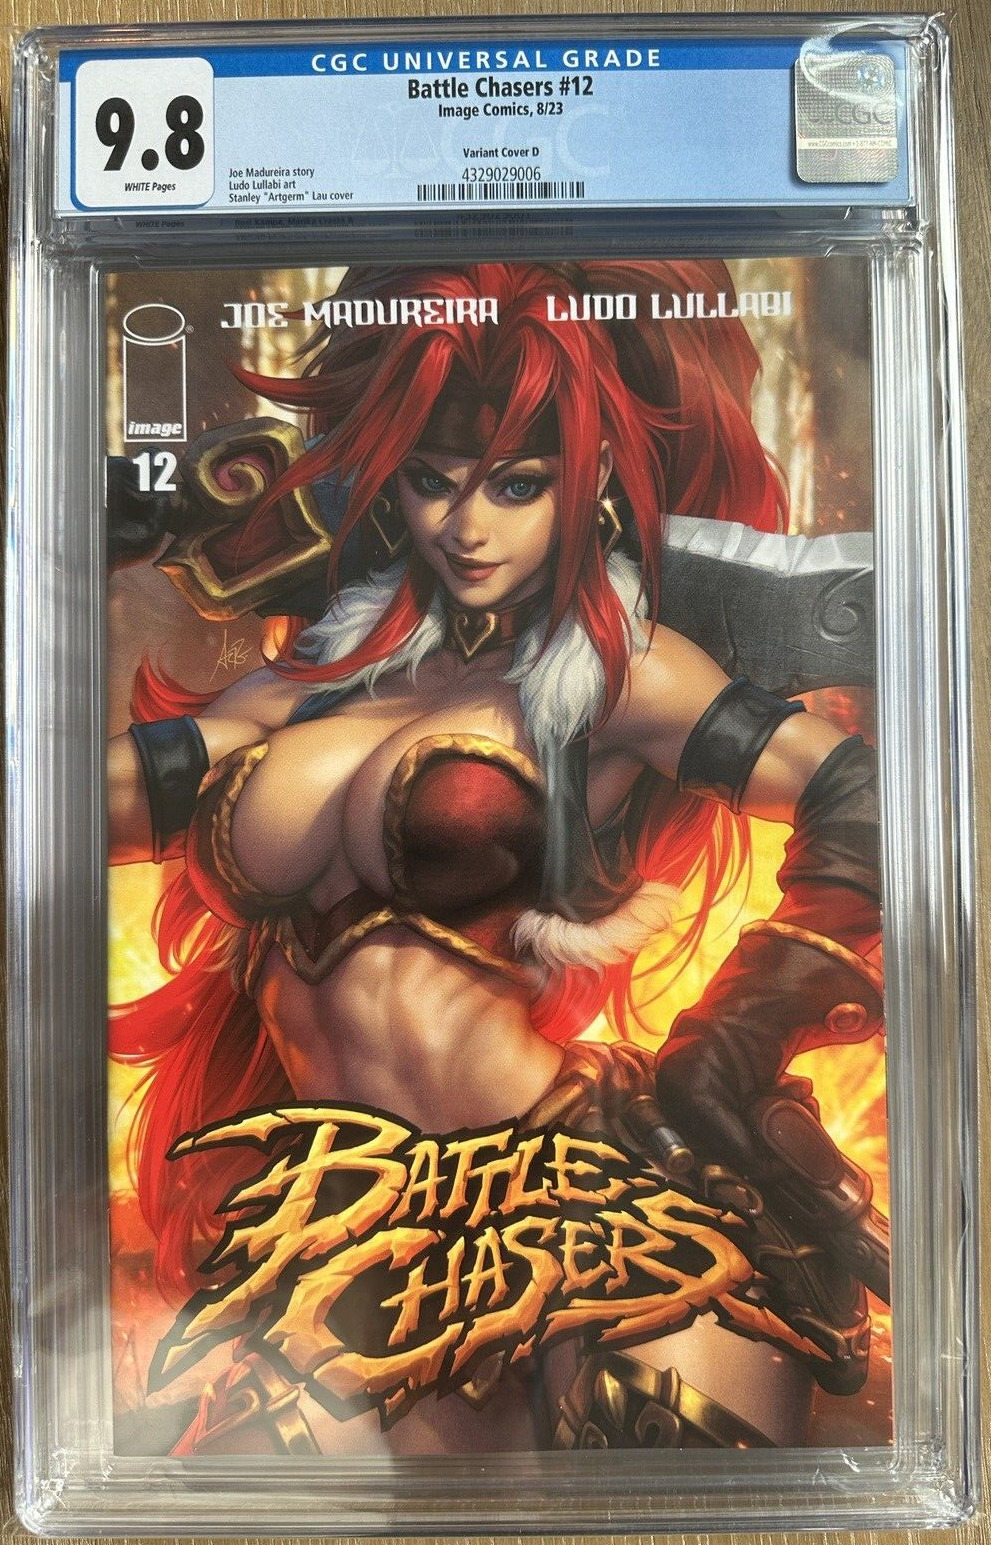 BATTLE CHASERS 12 RED Monika Sexy Stanley Artgerm Lau Variant COVER D CGC 9.8